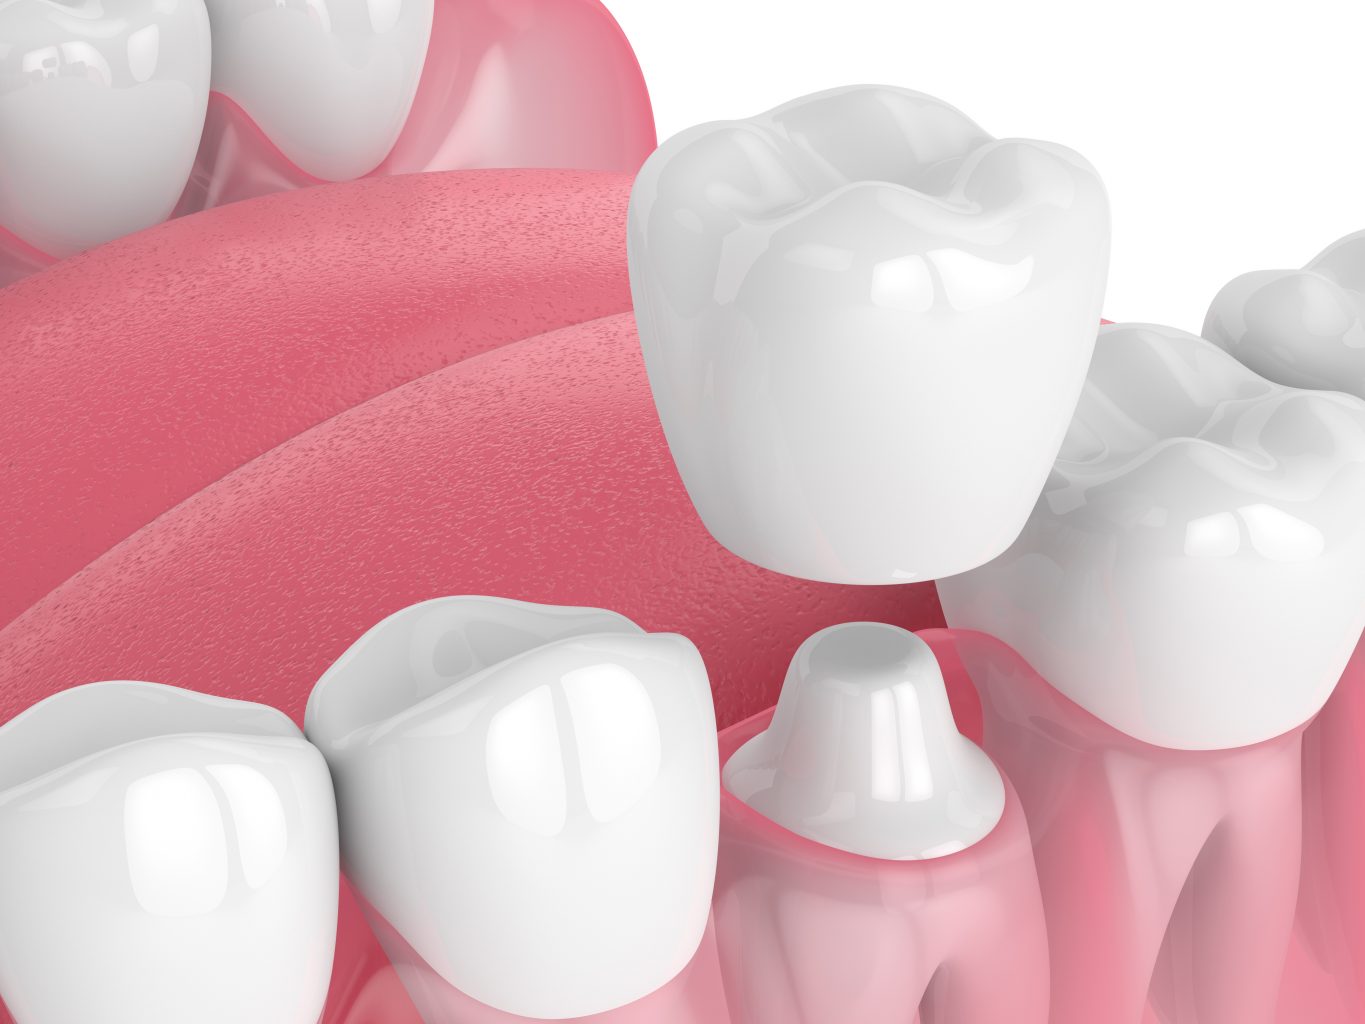 3d Render Of Jaw With Teeth And Dental Crown Restoration